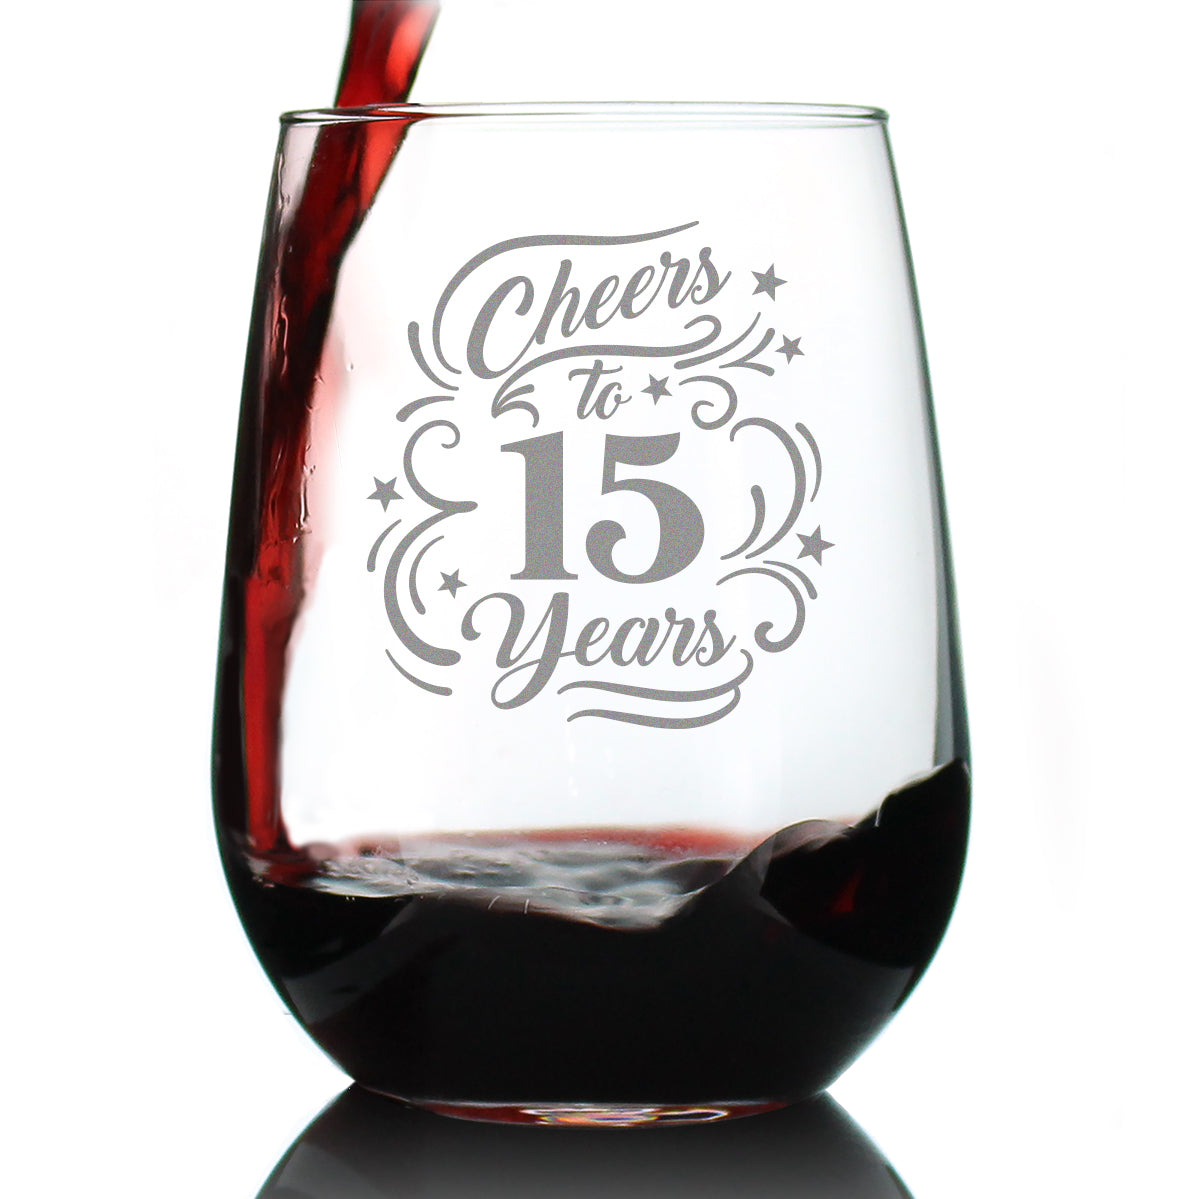 Cheers to 15 Years - Stemless Wine Glass Gifts for Women &amp; Men - 15th Anniversary Party Decor - Large 17 Oz Glasses